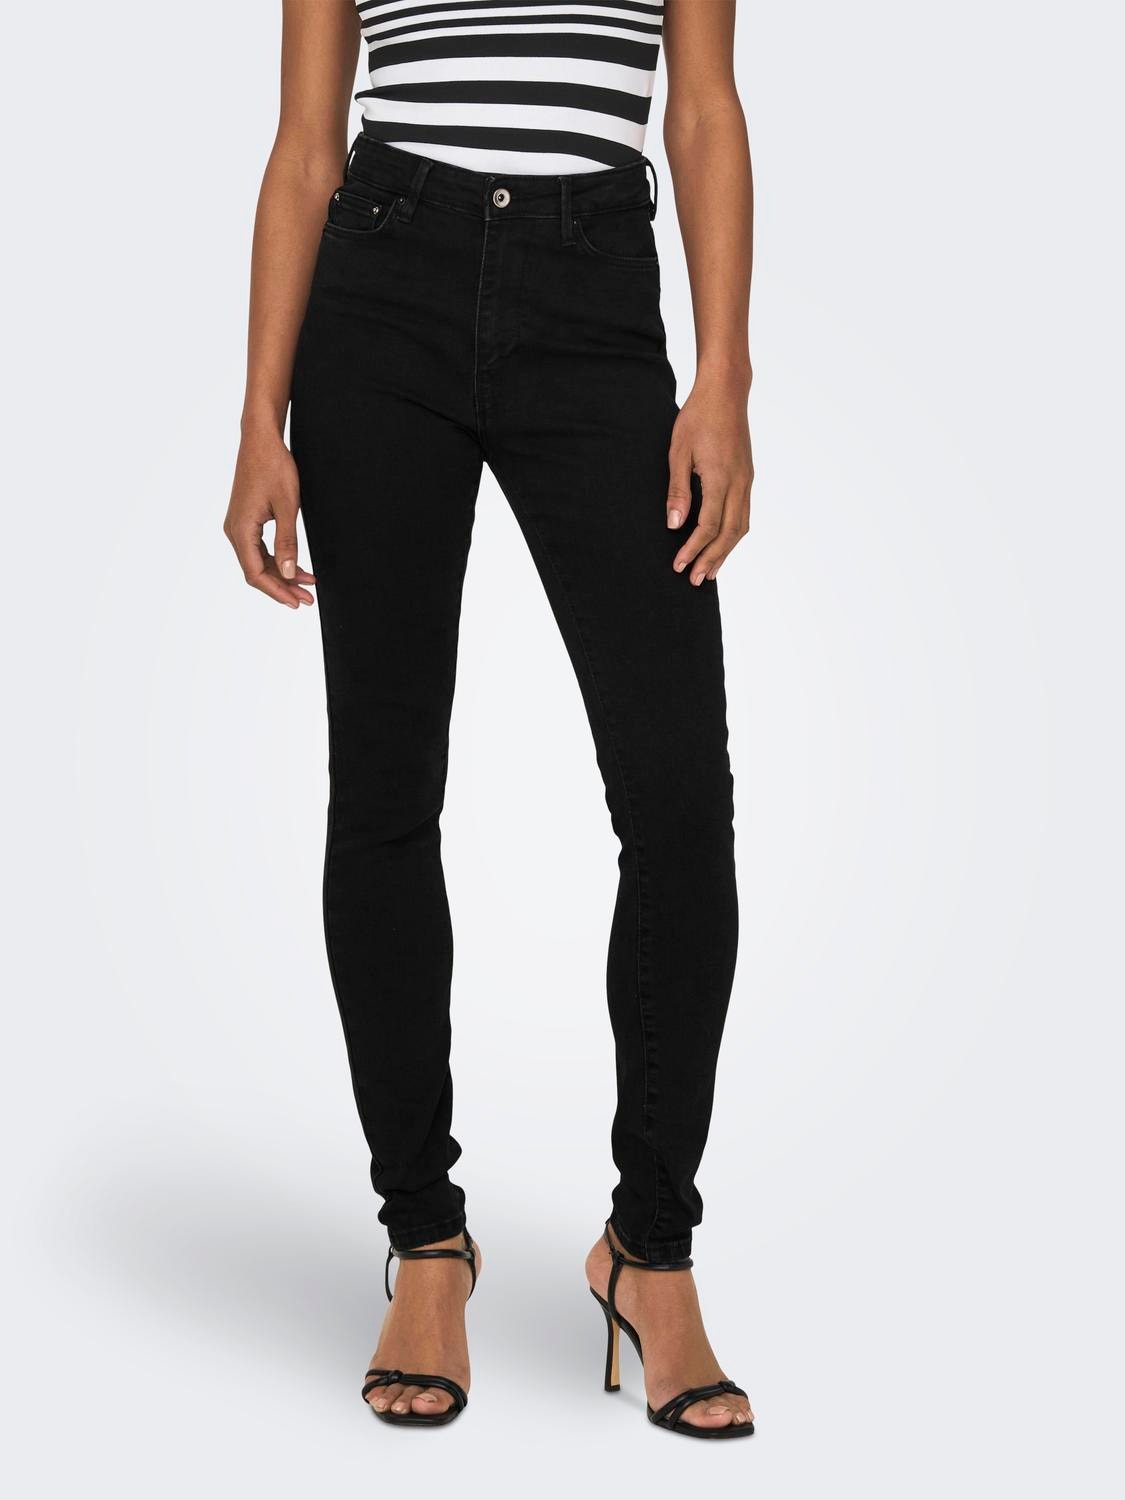 ONLY ONLICONIC NOOS - SKINNY LONGUEUR CHEVILLE jean taille haute -Black Denim - 15247810